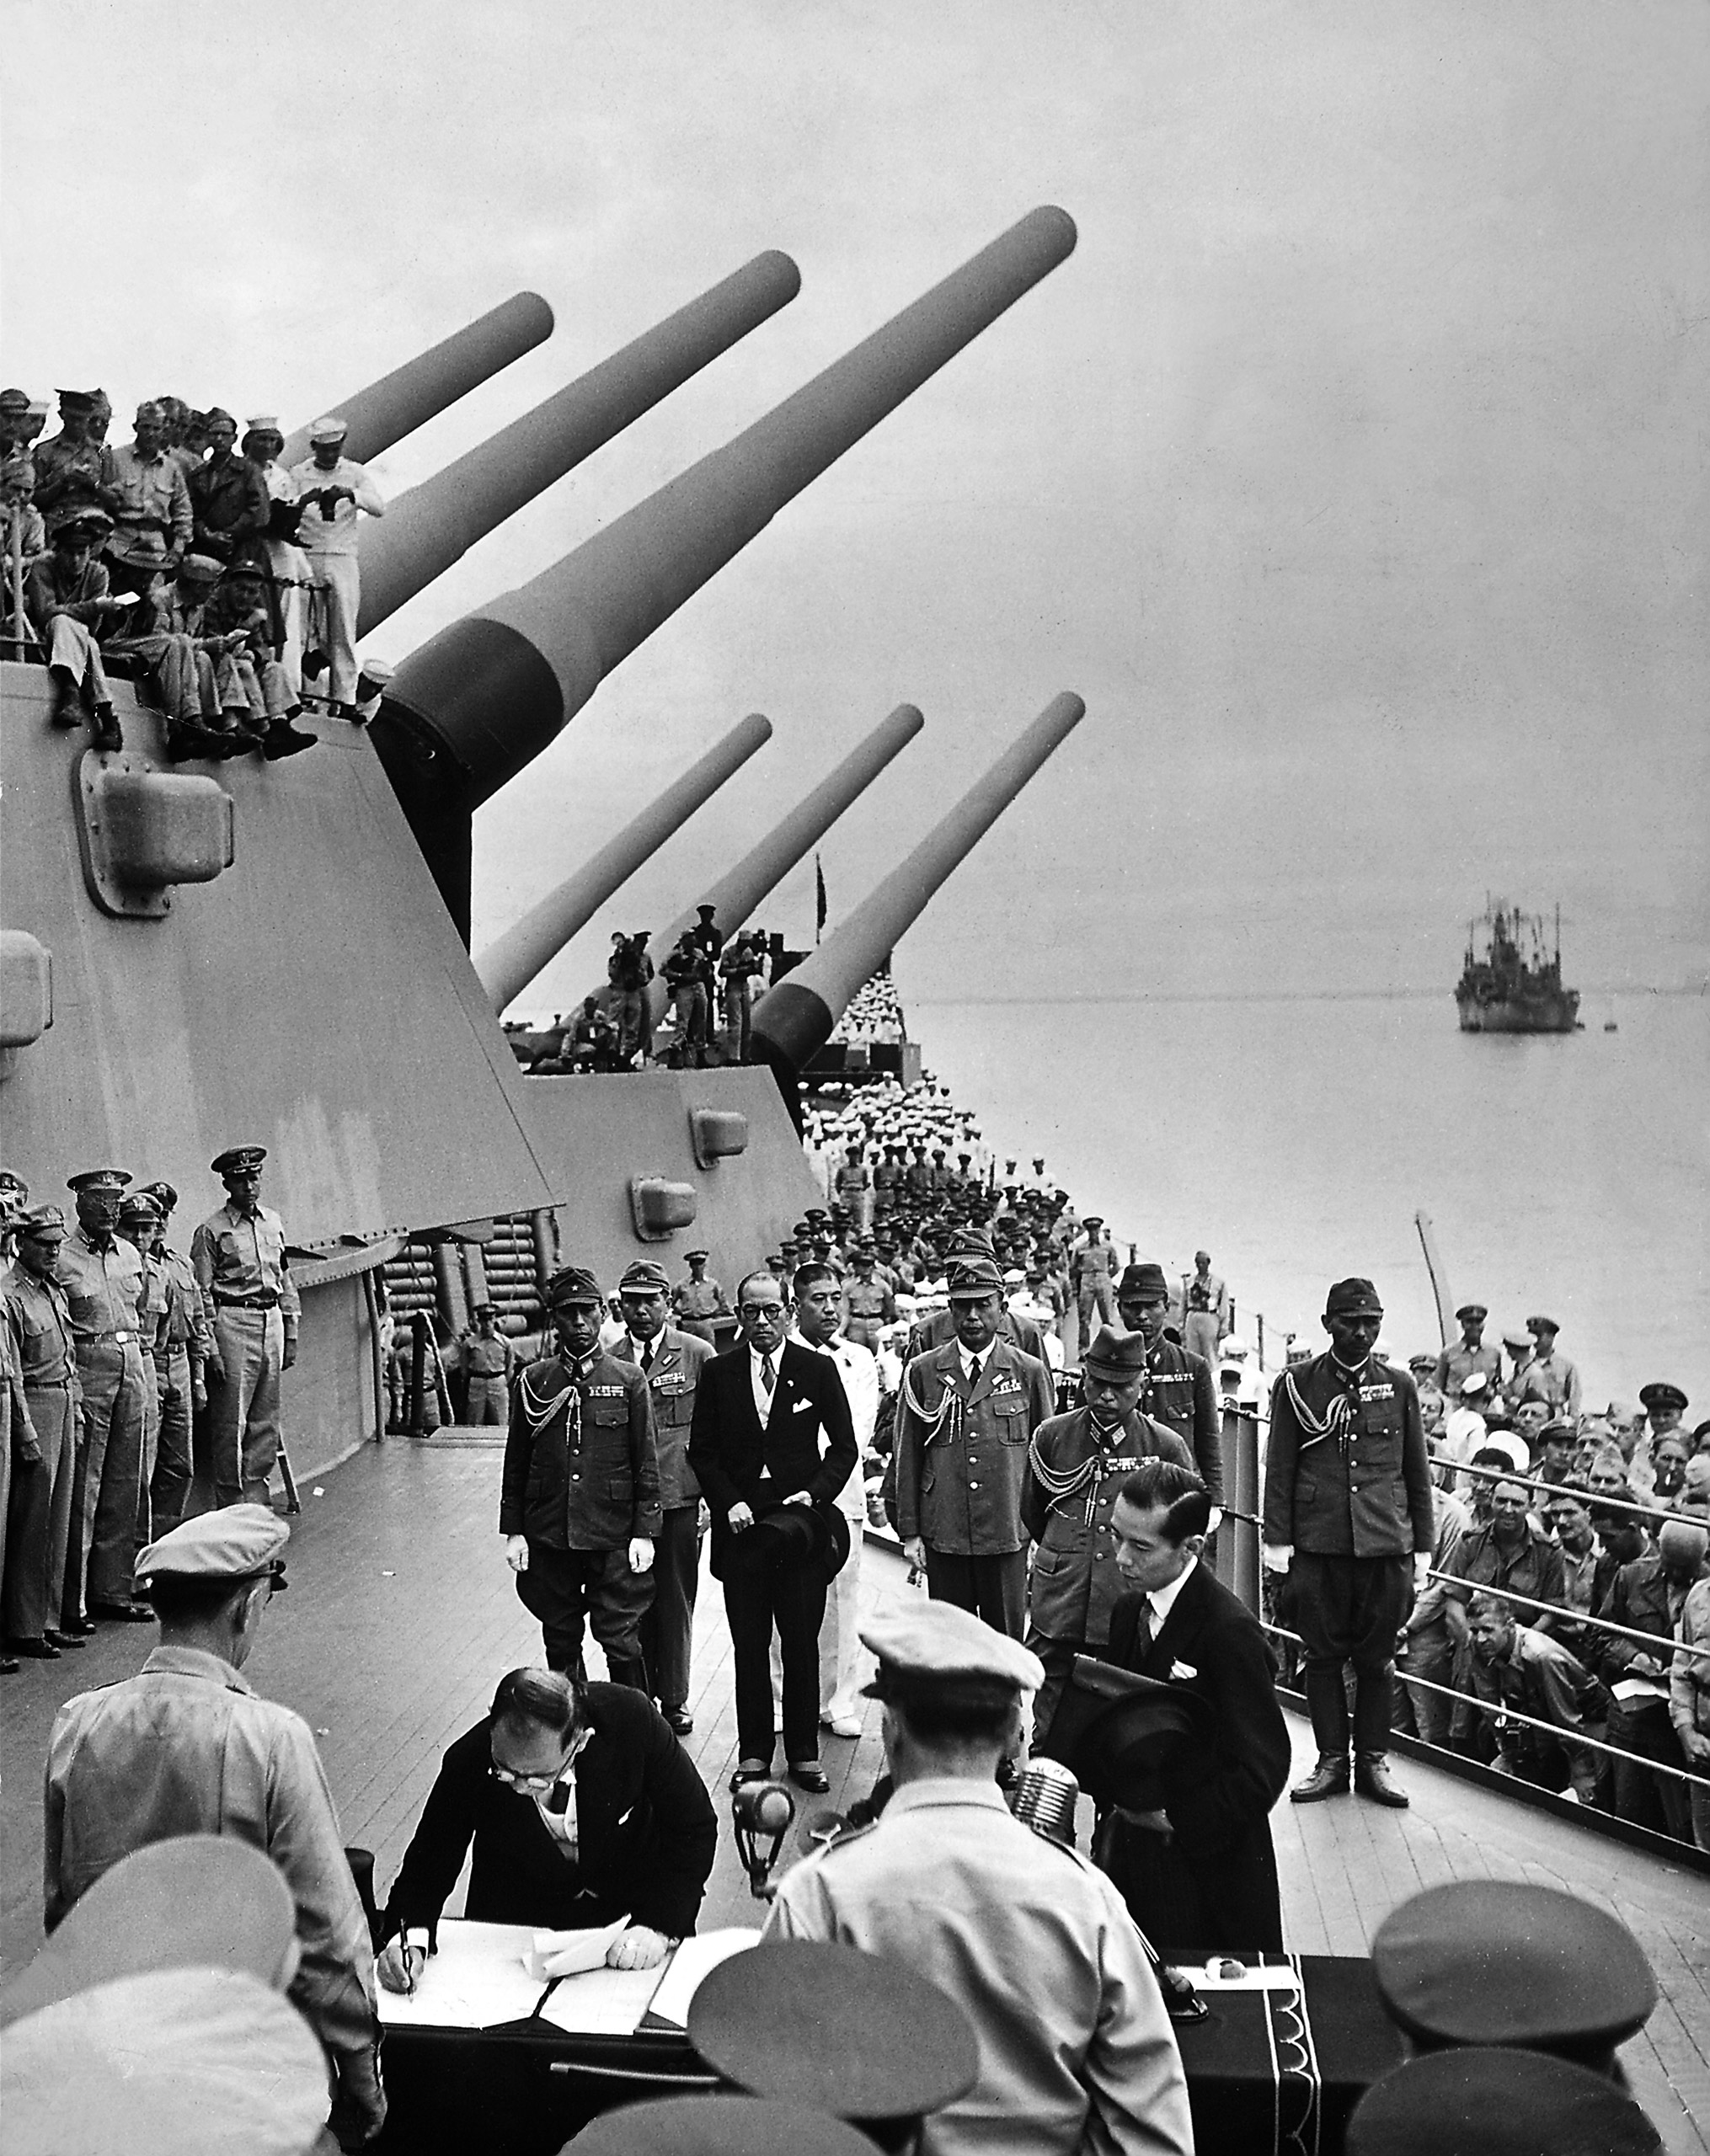 Allied officers and crew crowd decks of US battleship Missouri as senior Japanese delegate Mamoru Shigemitsu signs official surrender documents ending WWII. This image appeared in the Sept. 17, 1945 feature: Japan Signs the Surrender.